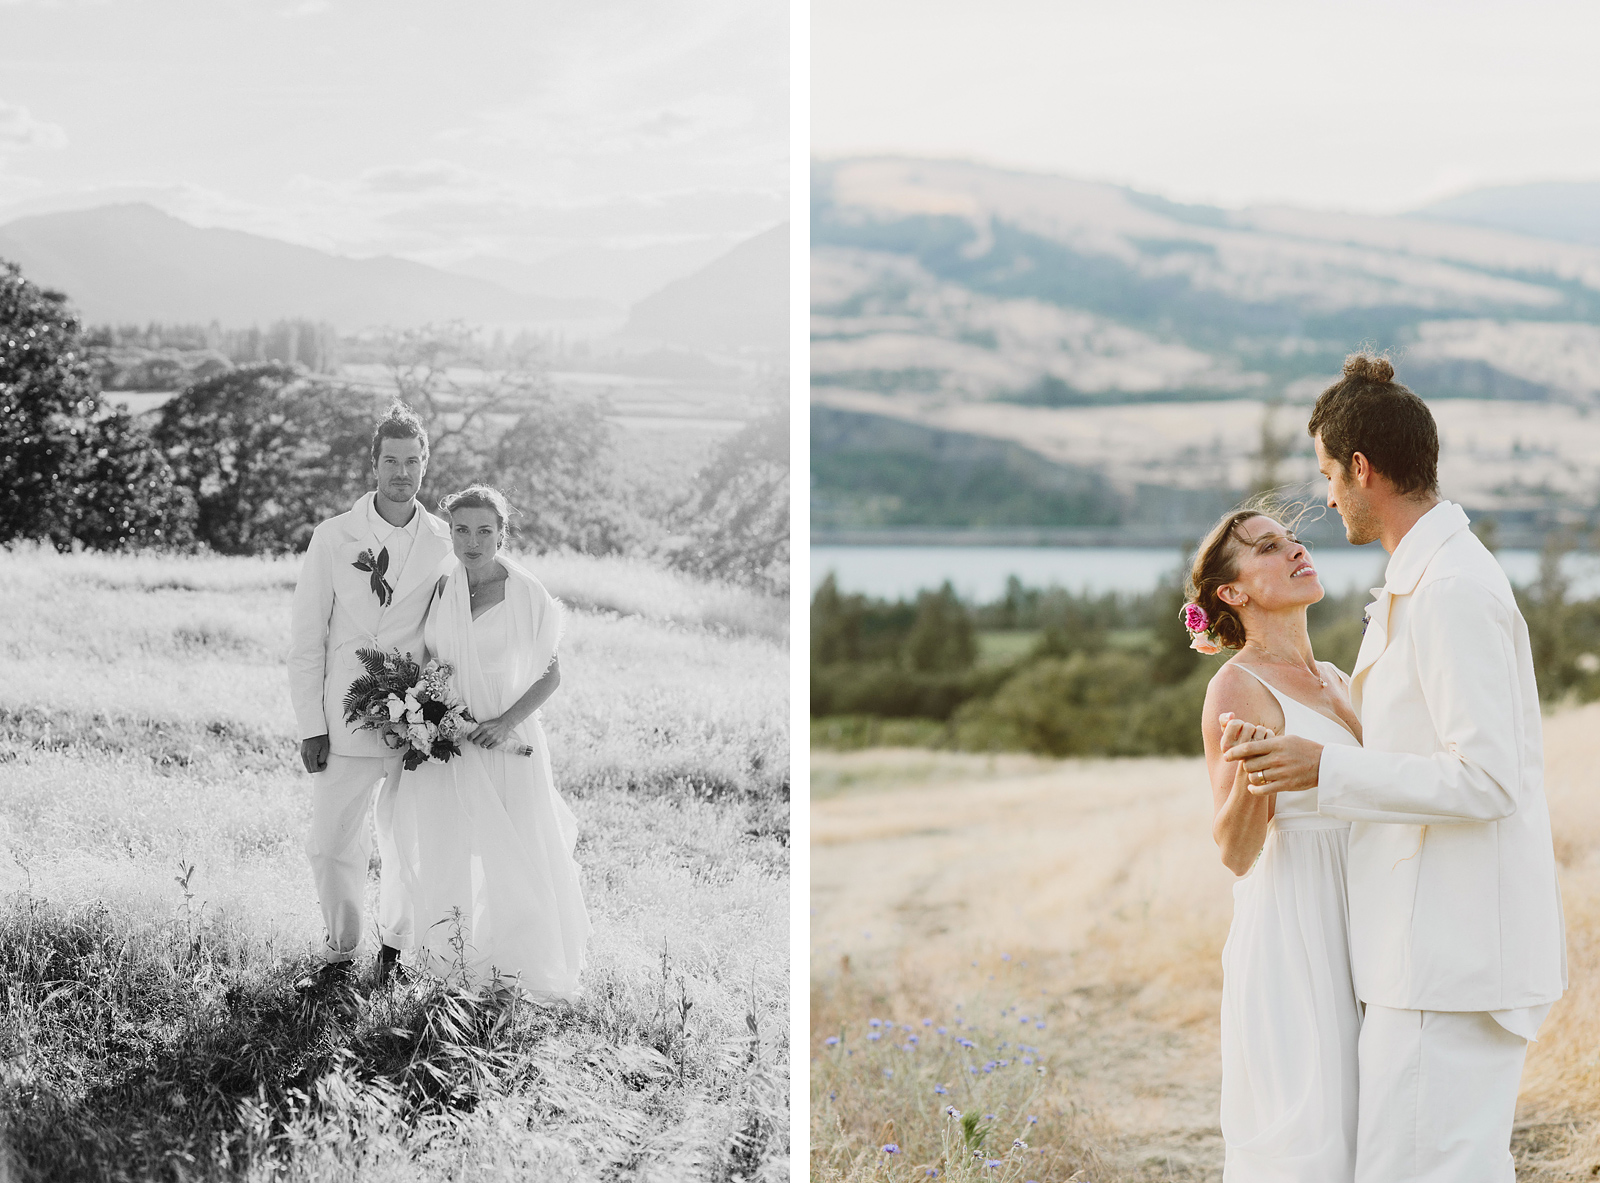 Bride and groom dancing in a field during golden hour - Columbia River Gorge wedding